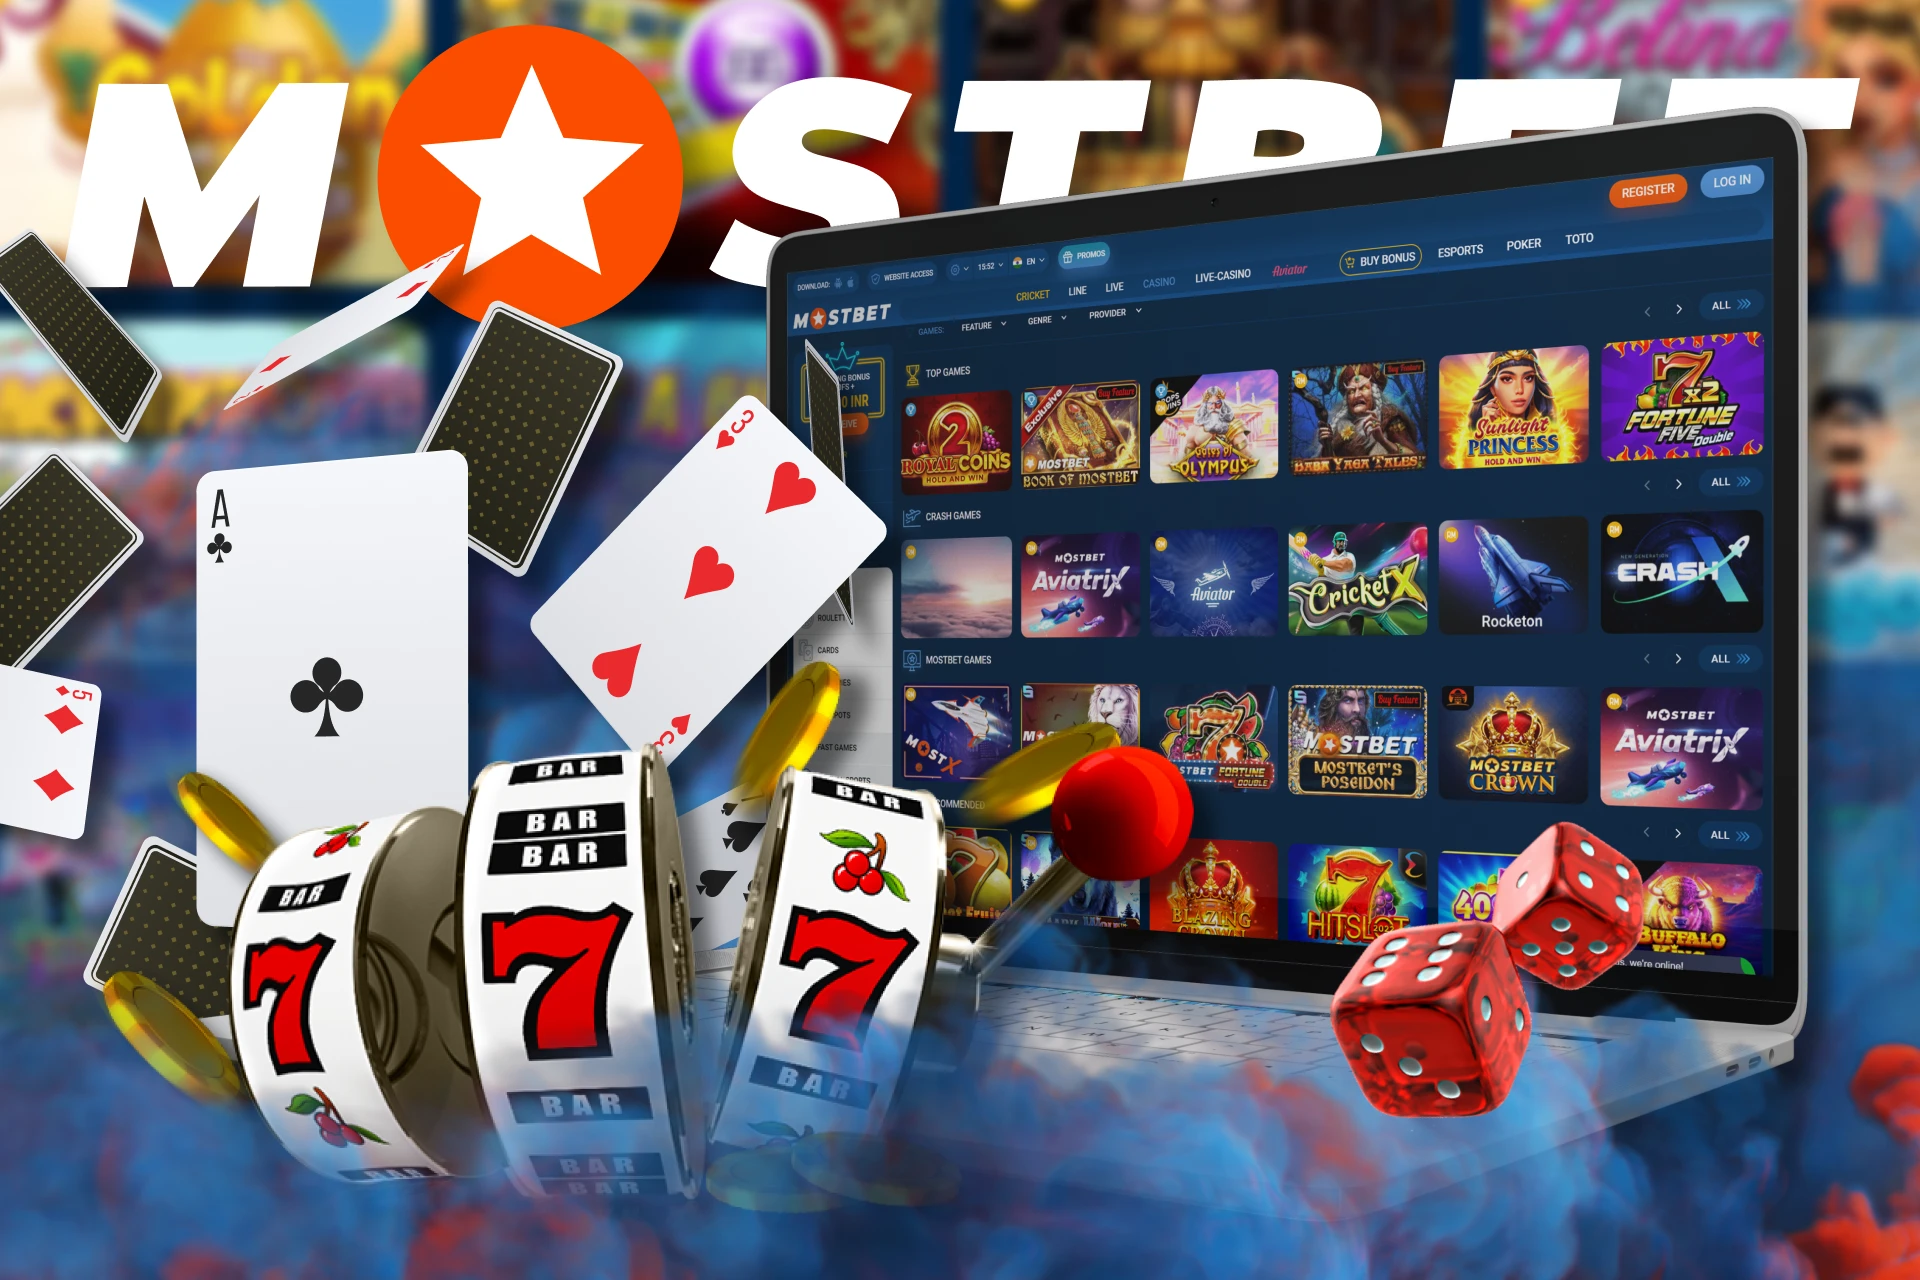 You can play a lot of different games at Mostbet Casino.